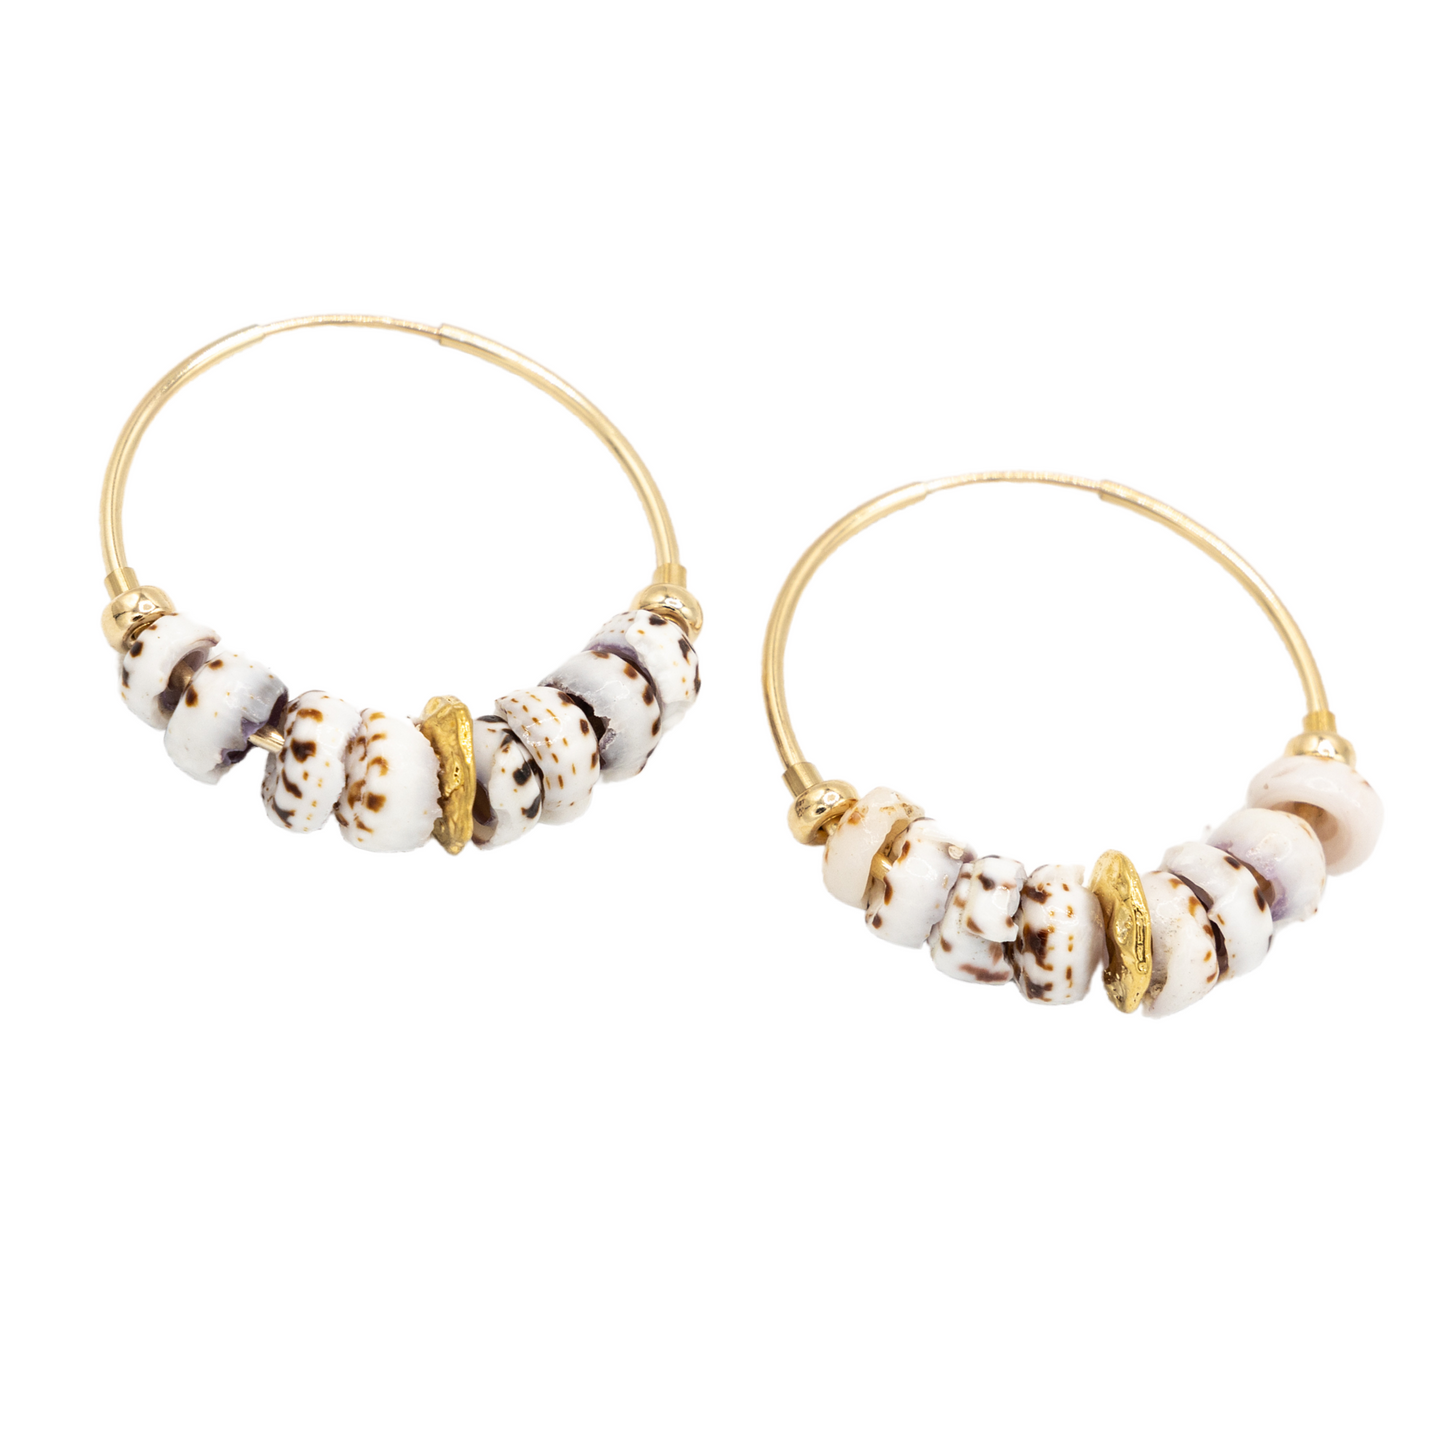 Pukalii Hoop Earrings - Gold - 21 Degrees North Designs - 21ºN